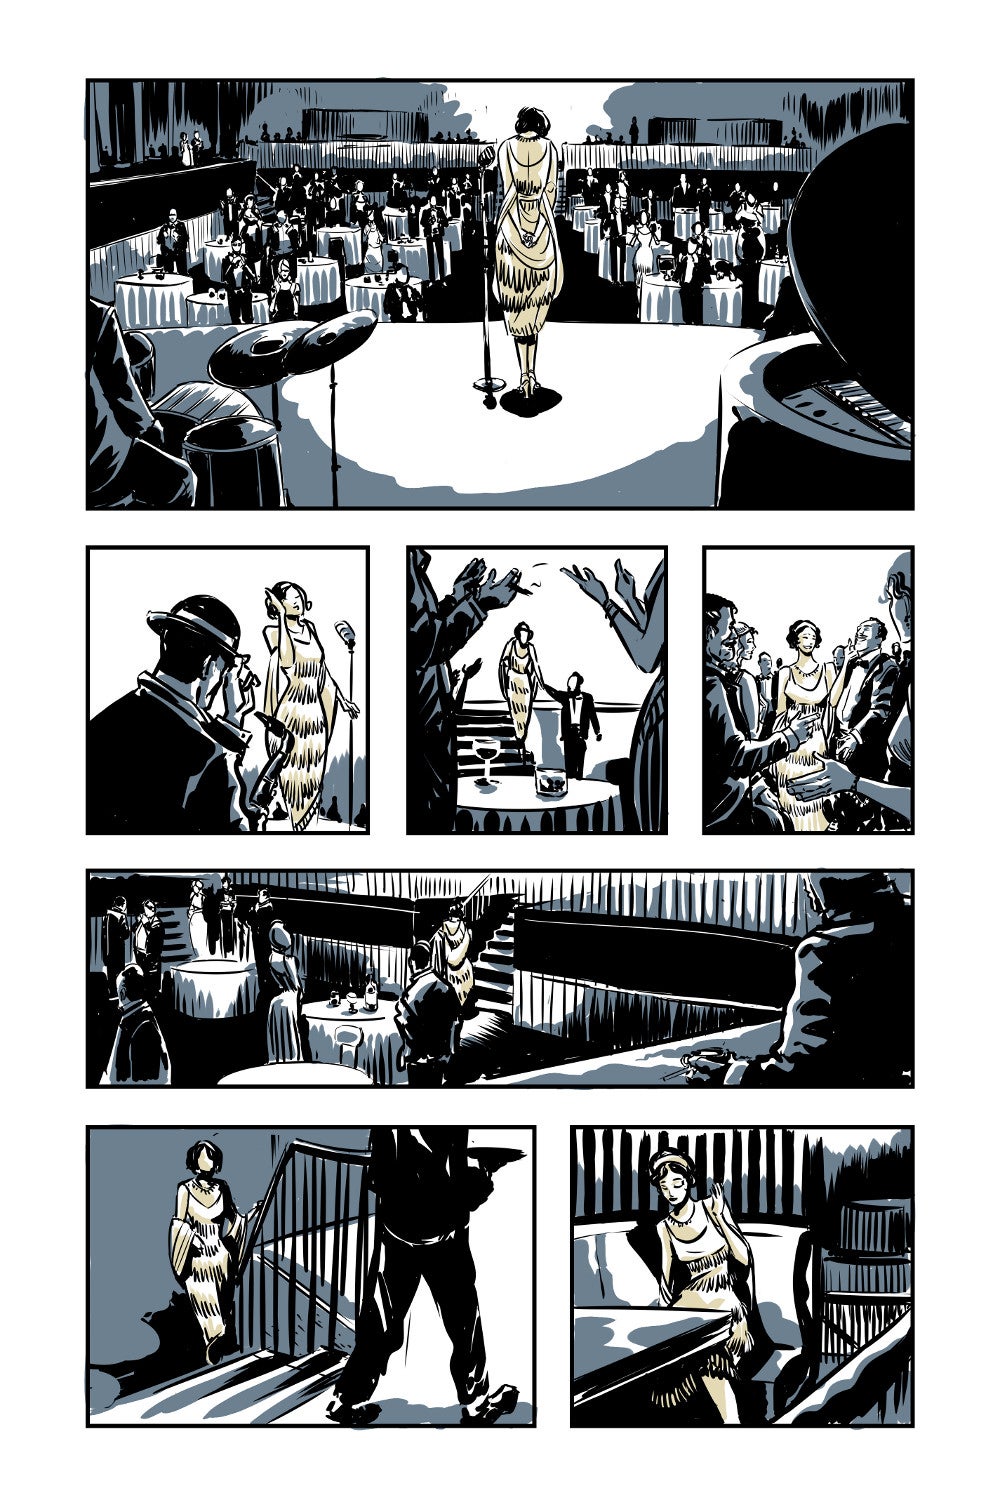 Illustrated comics page inside a bar